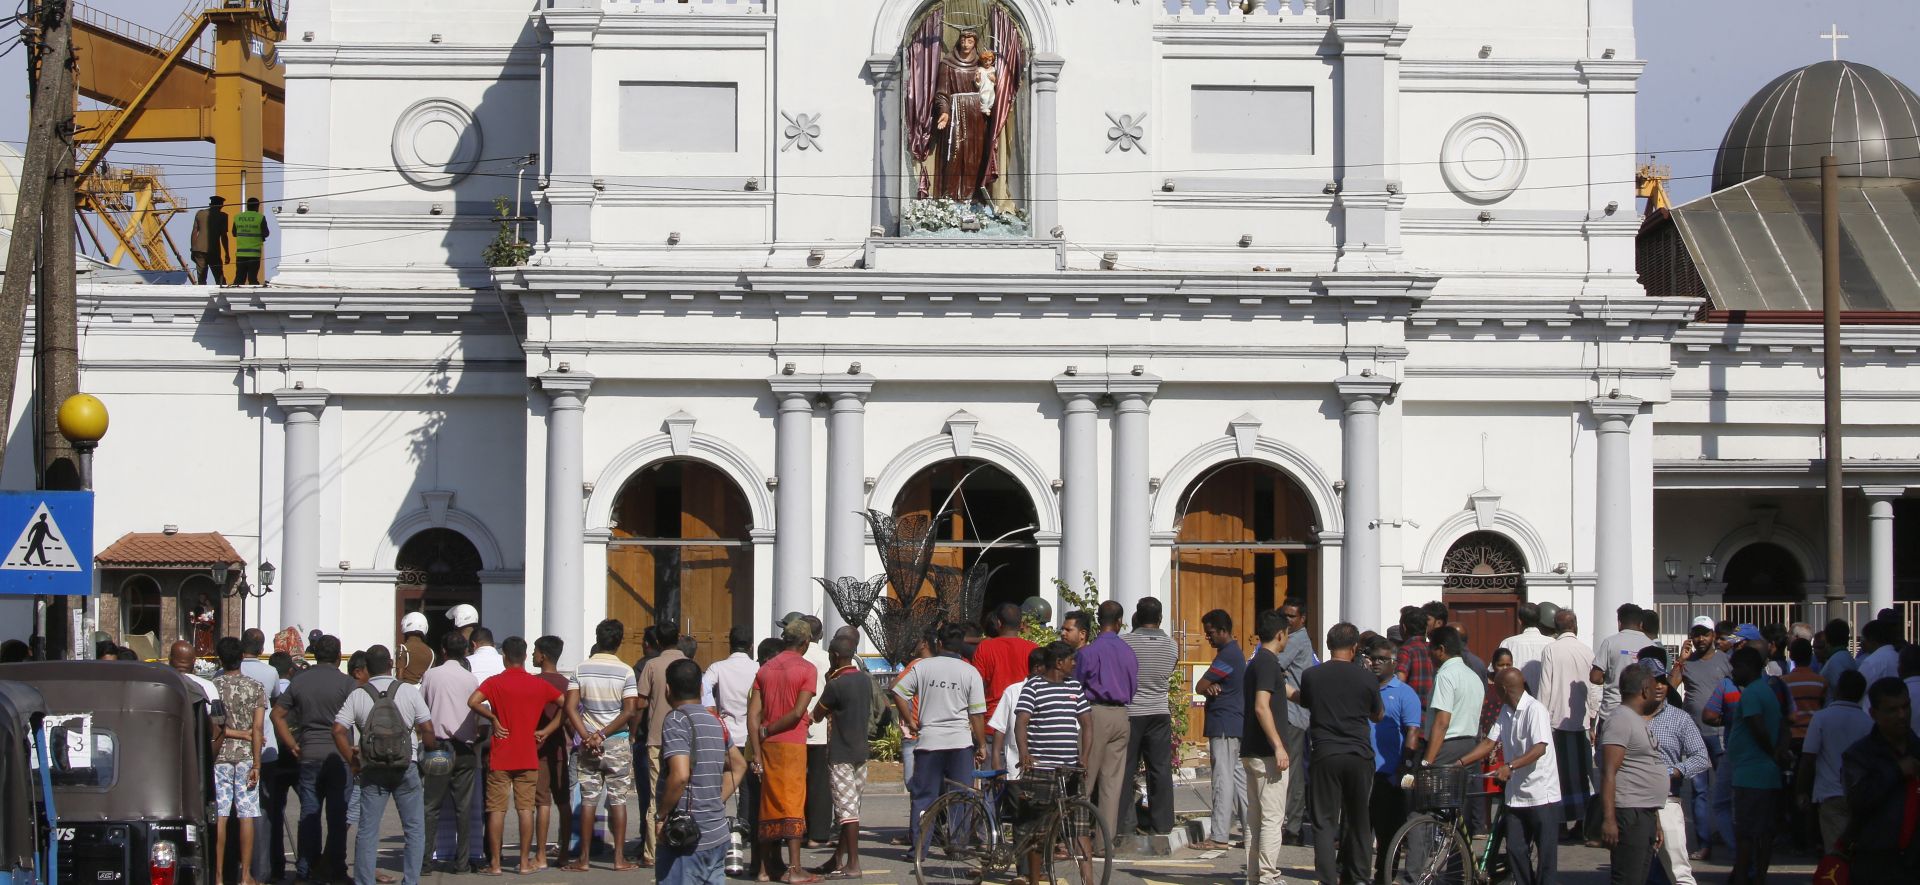 epa07520941 Sri Lankan people stand outside St. Anthony's Church in Kochchikade, Colombo, Sri Lanka, 22 April 2019. According to news reports, at least 290 people have been killed and over 500 injured in a series of blasts during Easter Sunday service at churches and hotels across Colombo on 21 April.   EPA/M.A. PUSHPA KUMARA